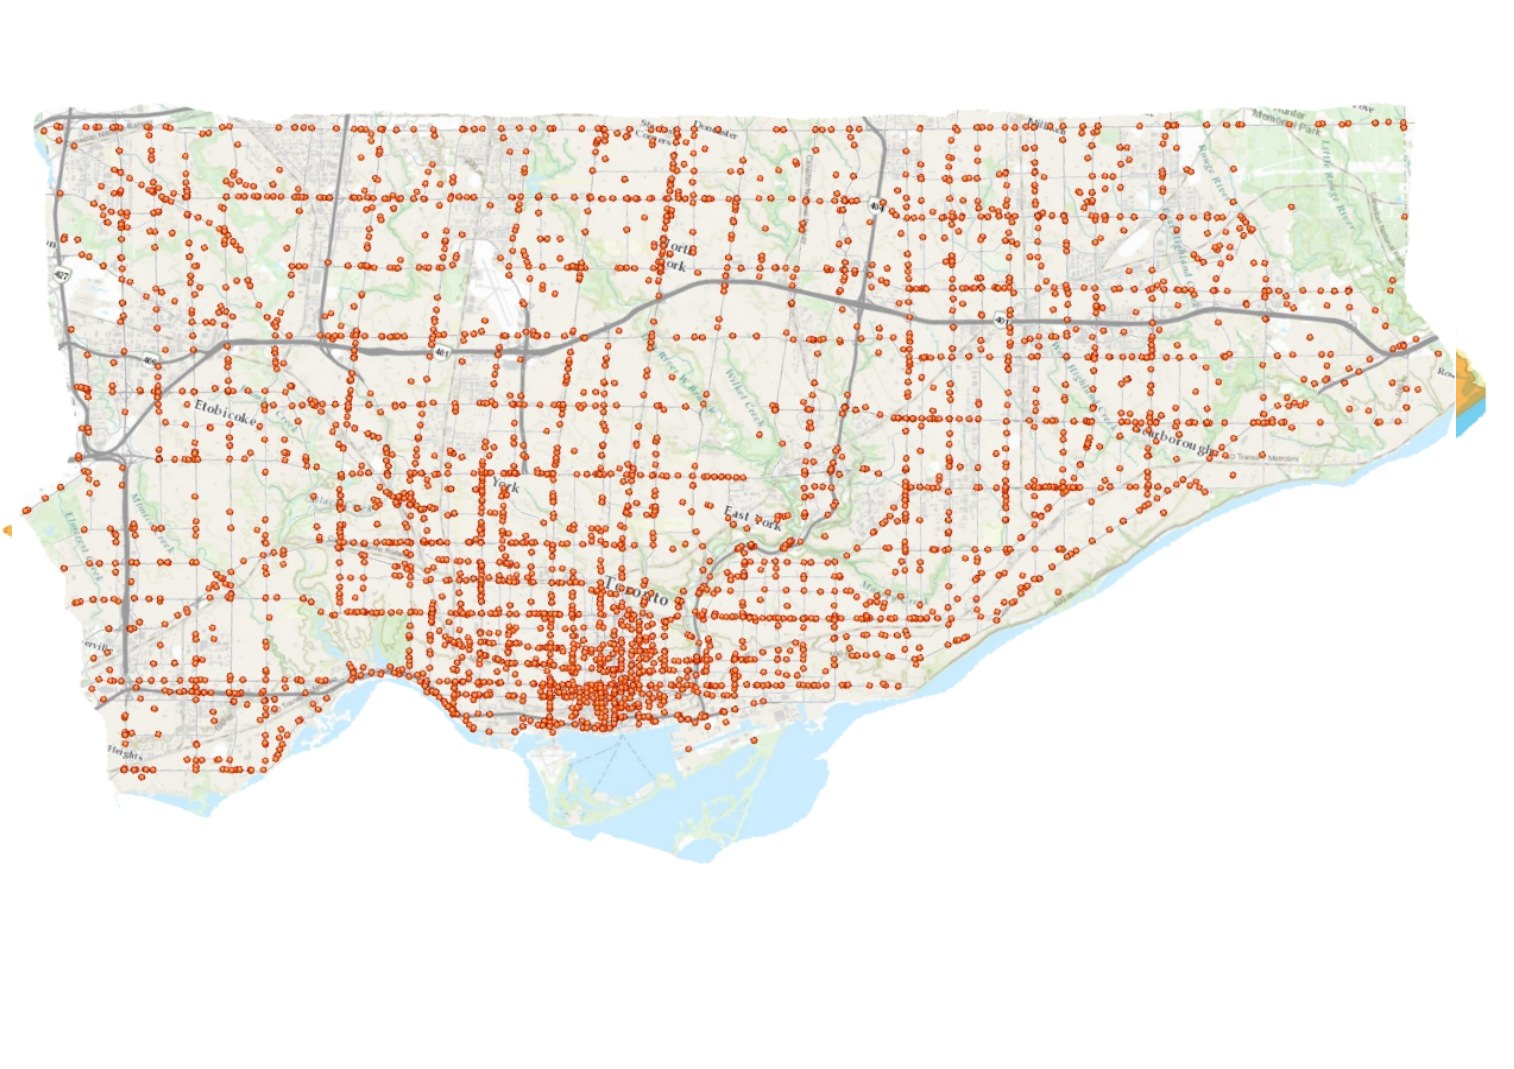 Car Insurance Rates In Toronto Appear To Be Based On Your pertaining to dimensions 1514 X 1069